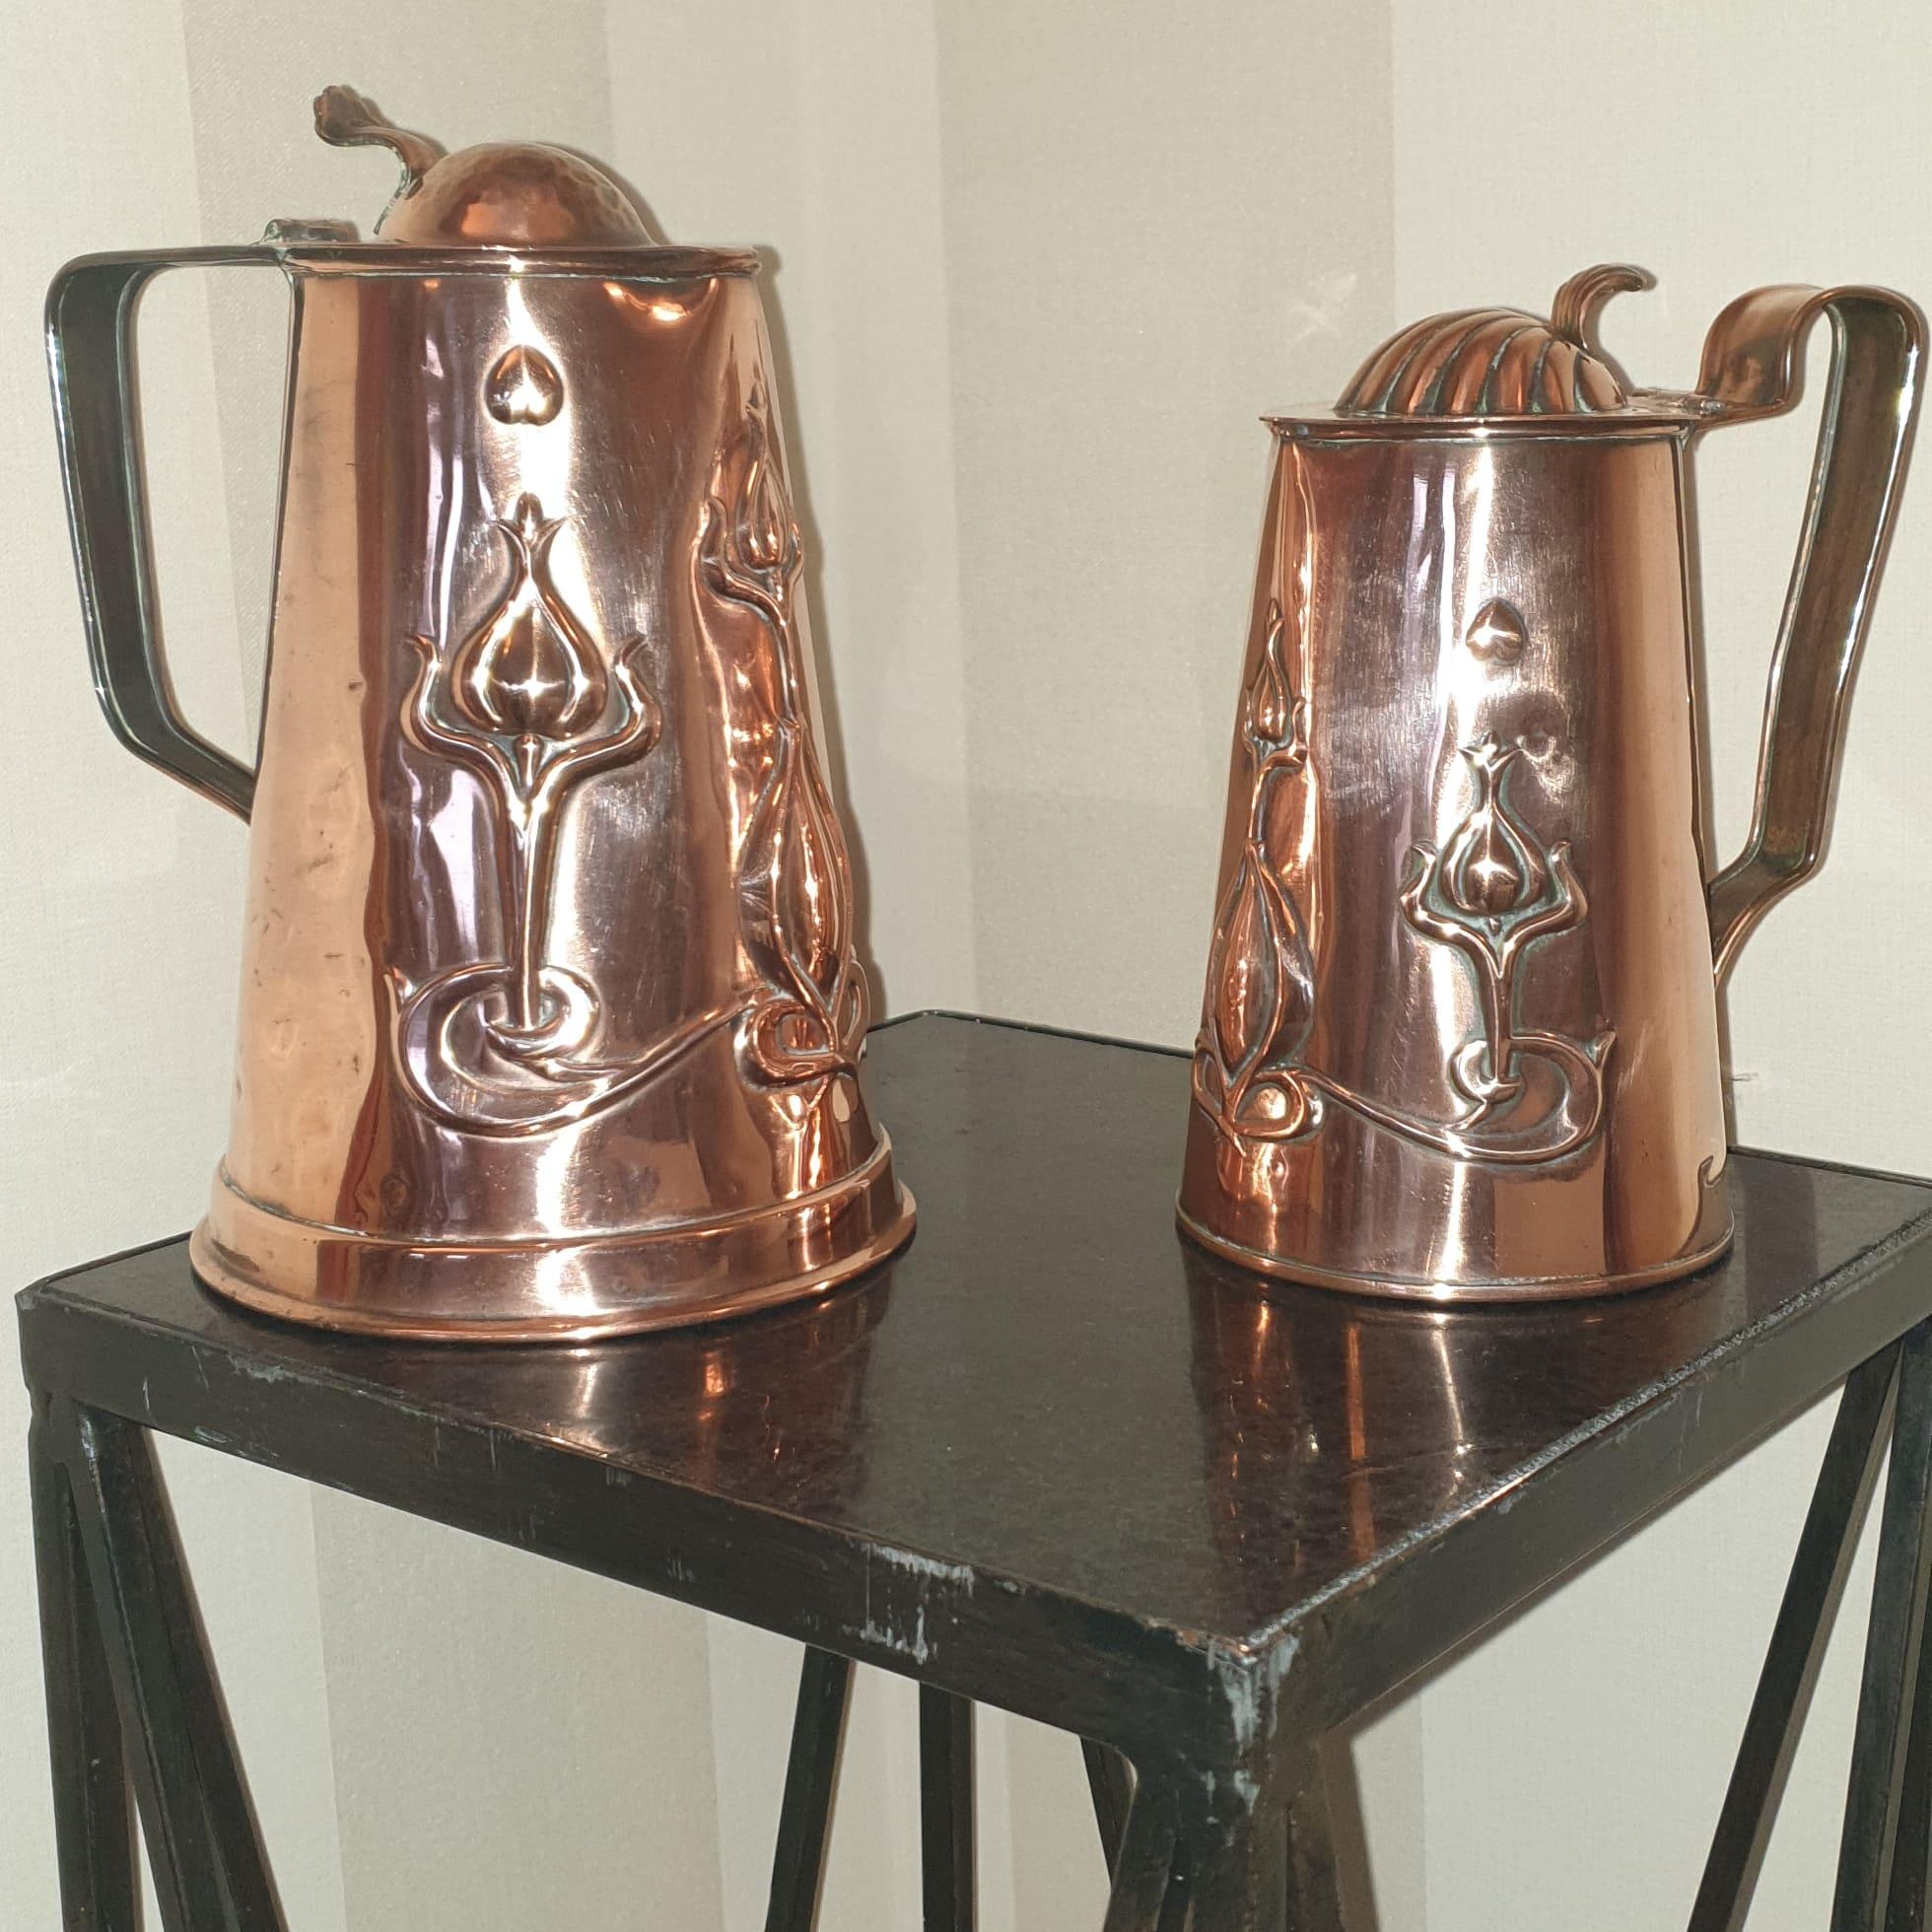 This is a pair of Art Nouveau Coffee pots dating from around 1900. They are not an identical pair but I am selling them as a pair. Hand made in tge UK around 1900 with the side motif decoration delightfully Art Nouveau. These items are practical as